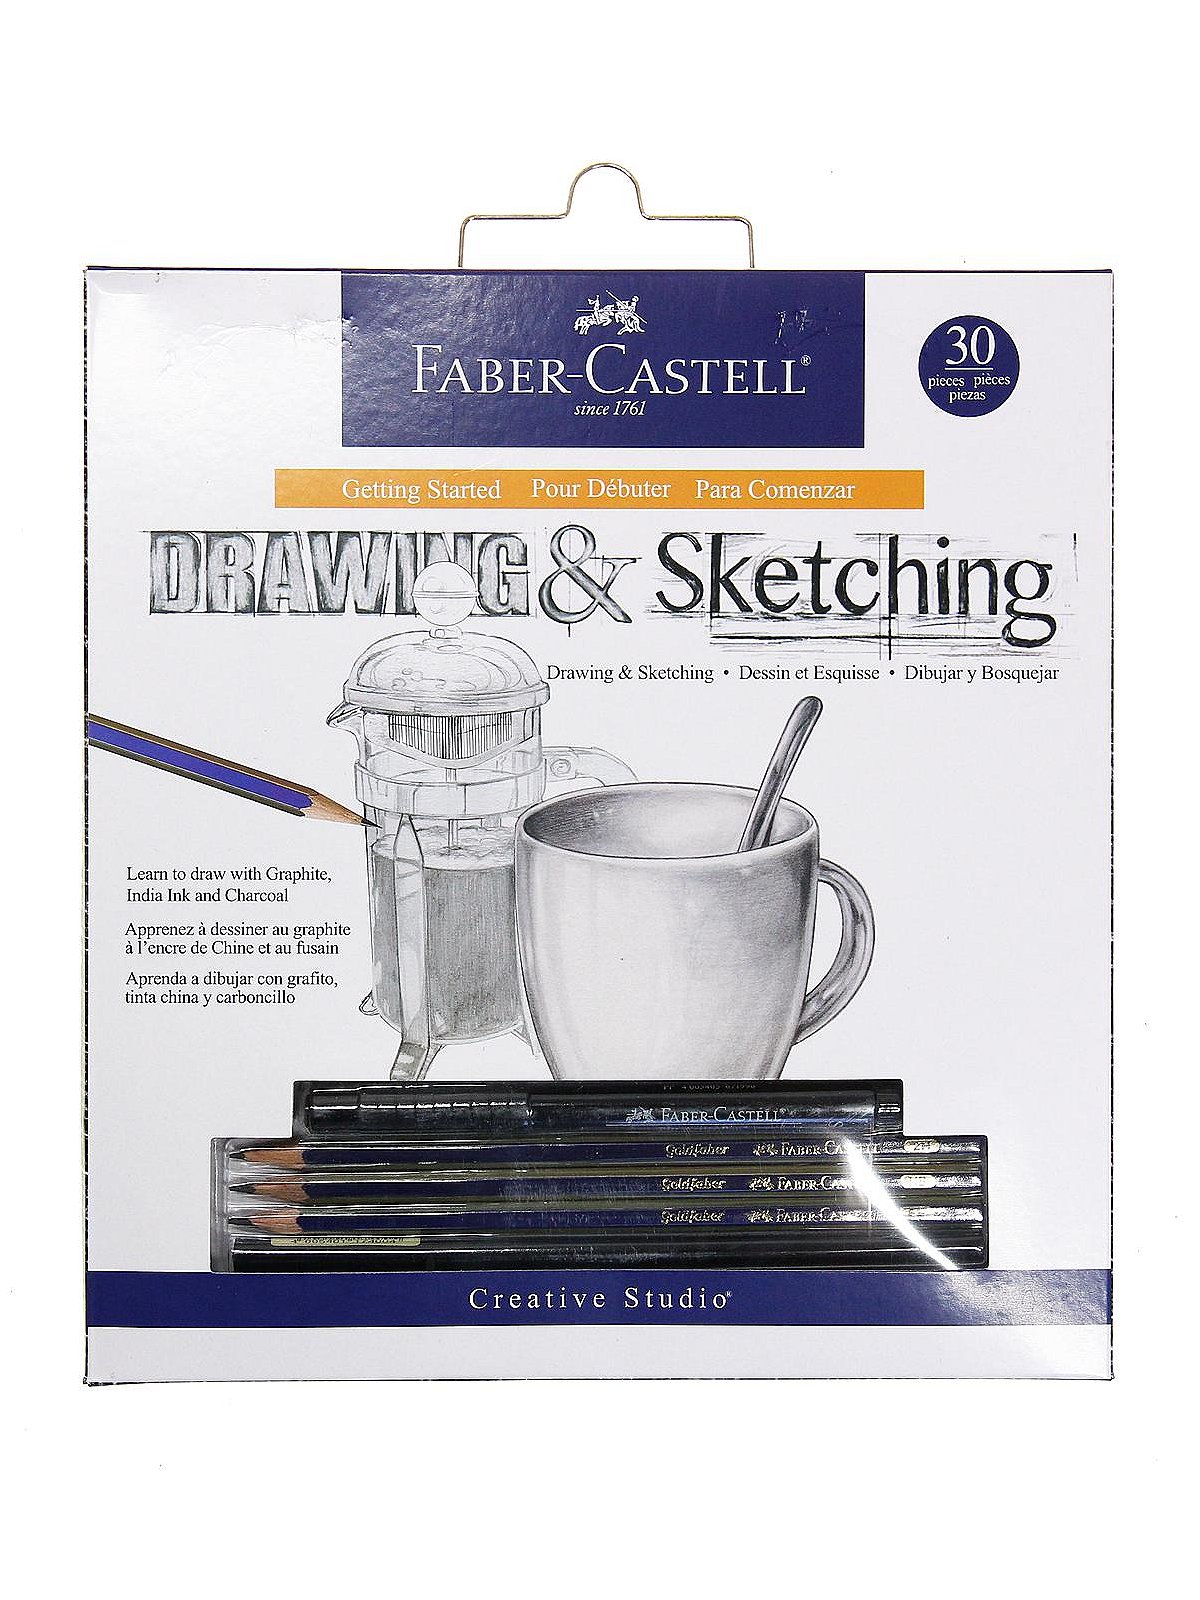 Faber-Castell Getting Started Drawing and Sketching Kit – The Art